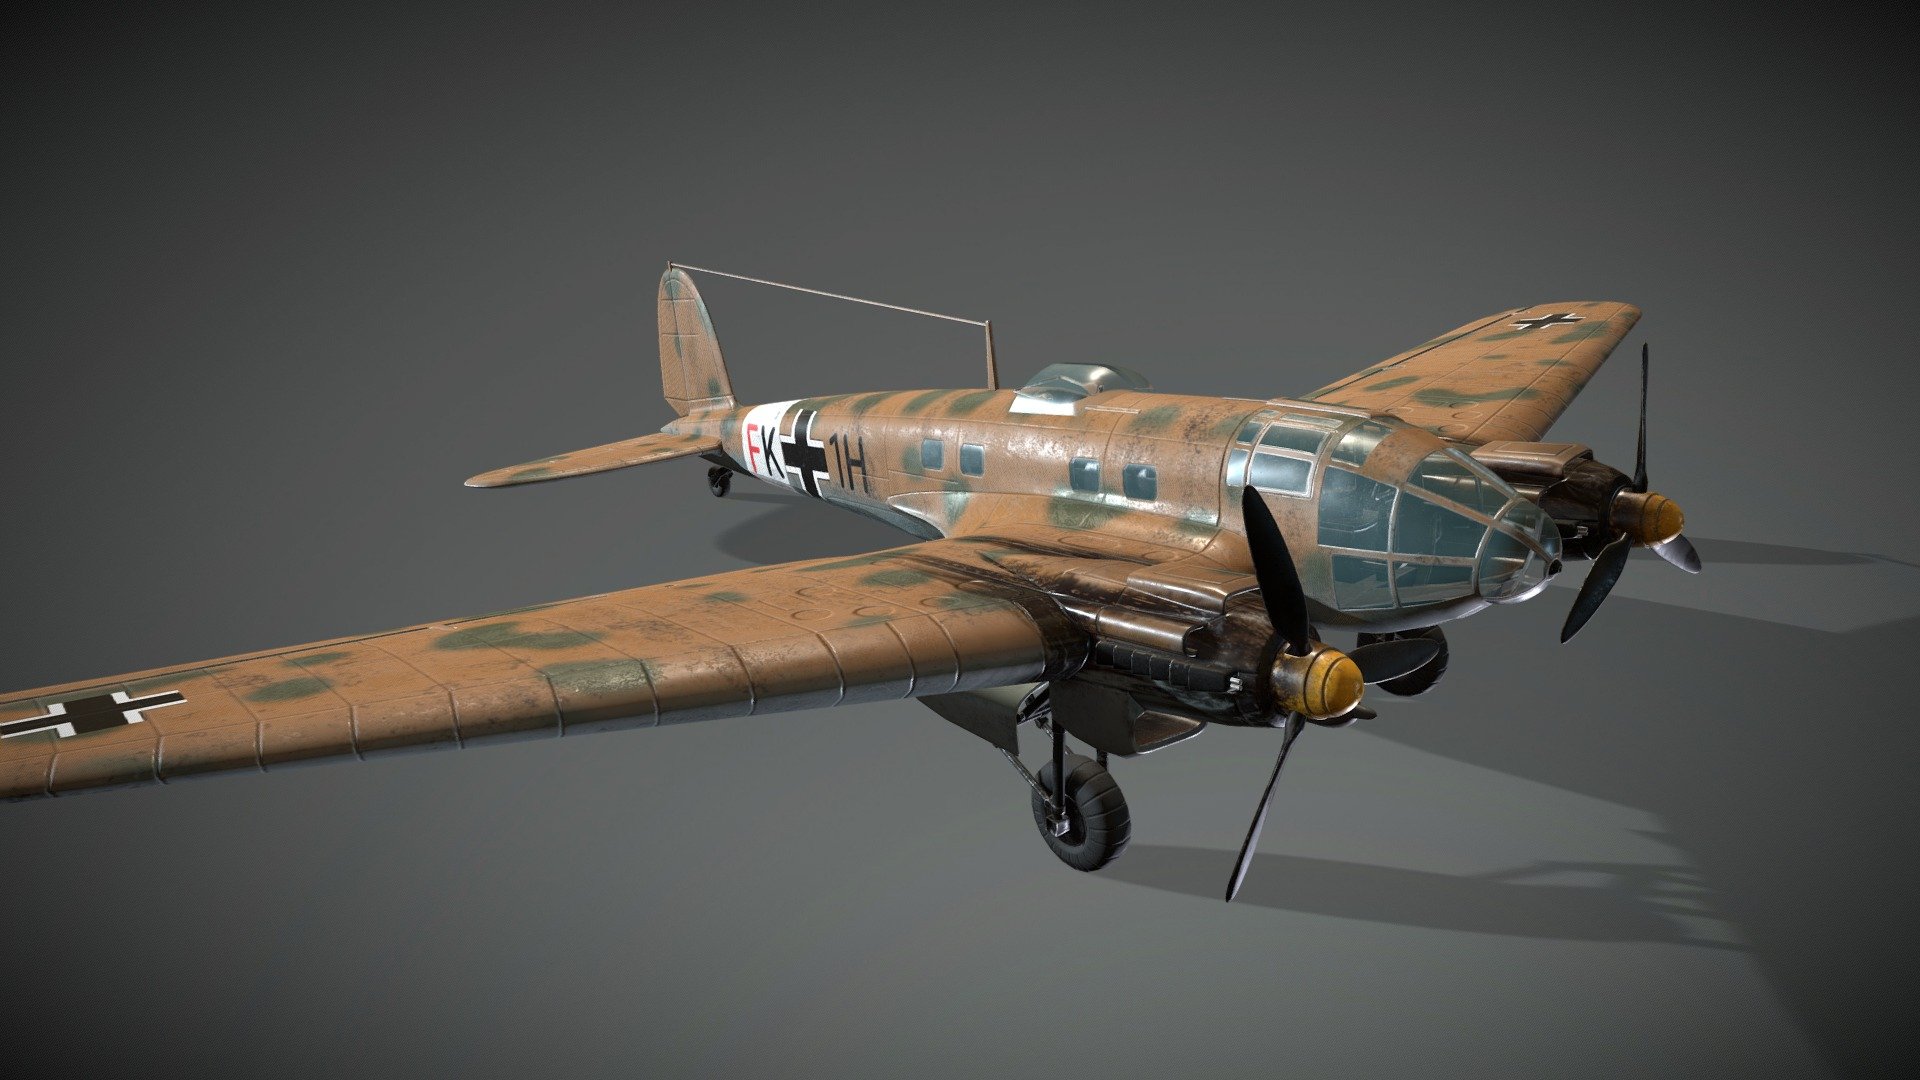 Heinkel He 111 - 3D Model for Escape Germany (PC-Game)

Fully rigged an animated ingame.
Flight Example BF109: https://www.youtube.com/watch?v=jb6zUBnfUZE&amp;t=8s

Model + Textures by: David Falke

Rigged + Animations by: Spaehling

Website: https://www.grip420.com/

Discord: Follow us on Discord

Facebook Follow us on Facebook

Game  Escape Germany - Escape Germany - HE 111 - 3D model by GRIP420 3d model